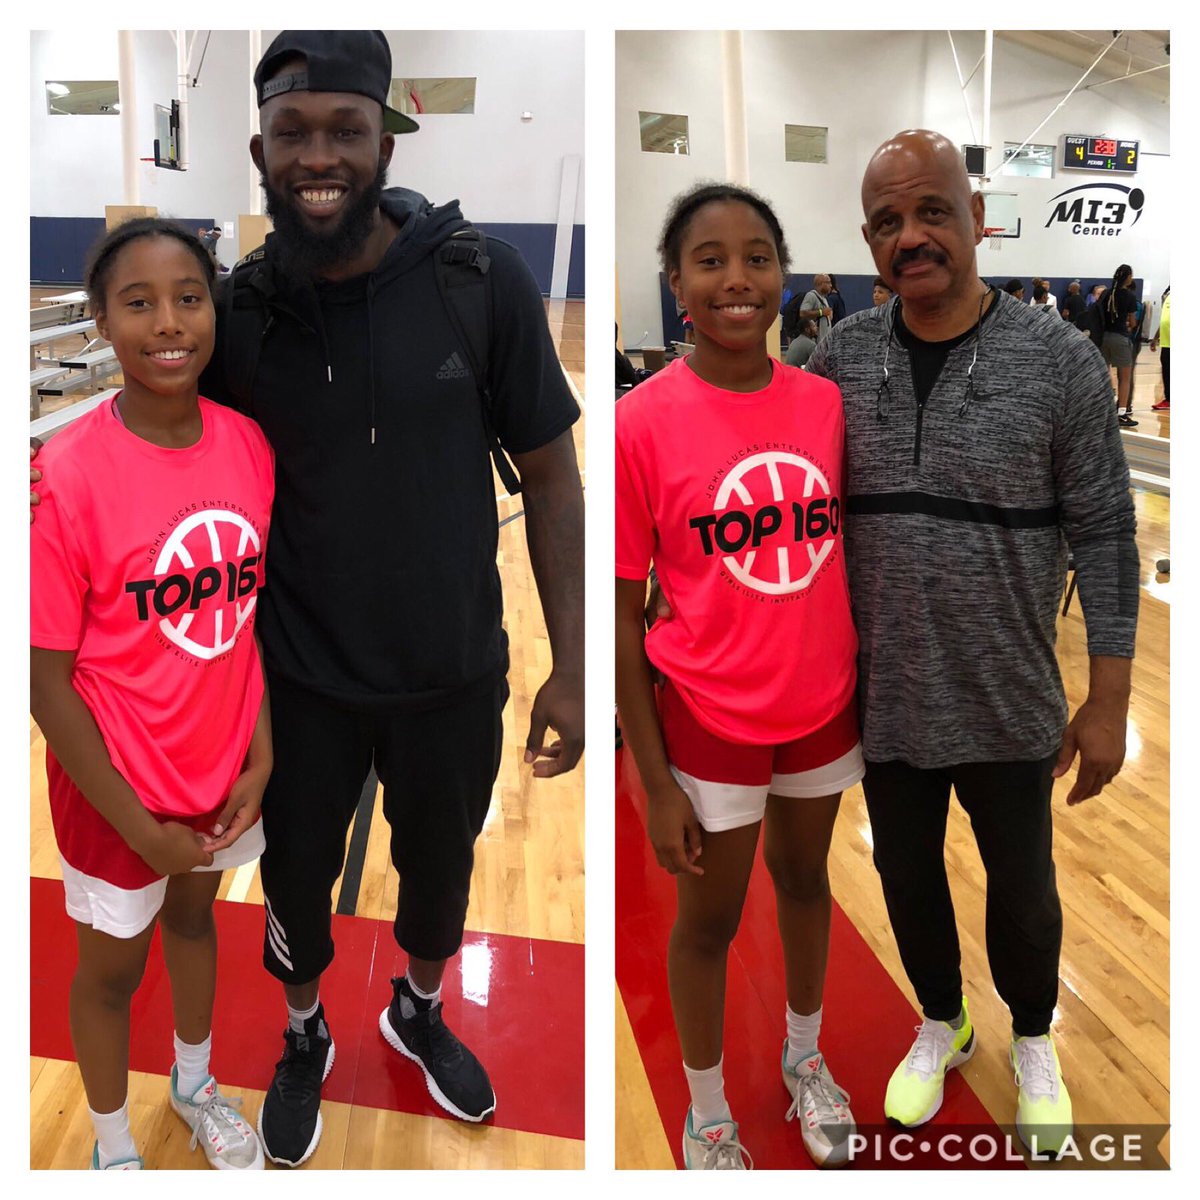 Great experience at the John Lucas Top 160 Camp. Thanks to John Lucas,staff and players for the challenge. @bill_crothers @become1WBB